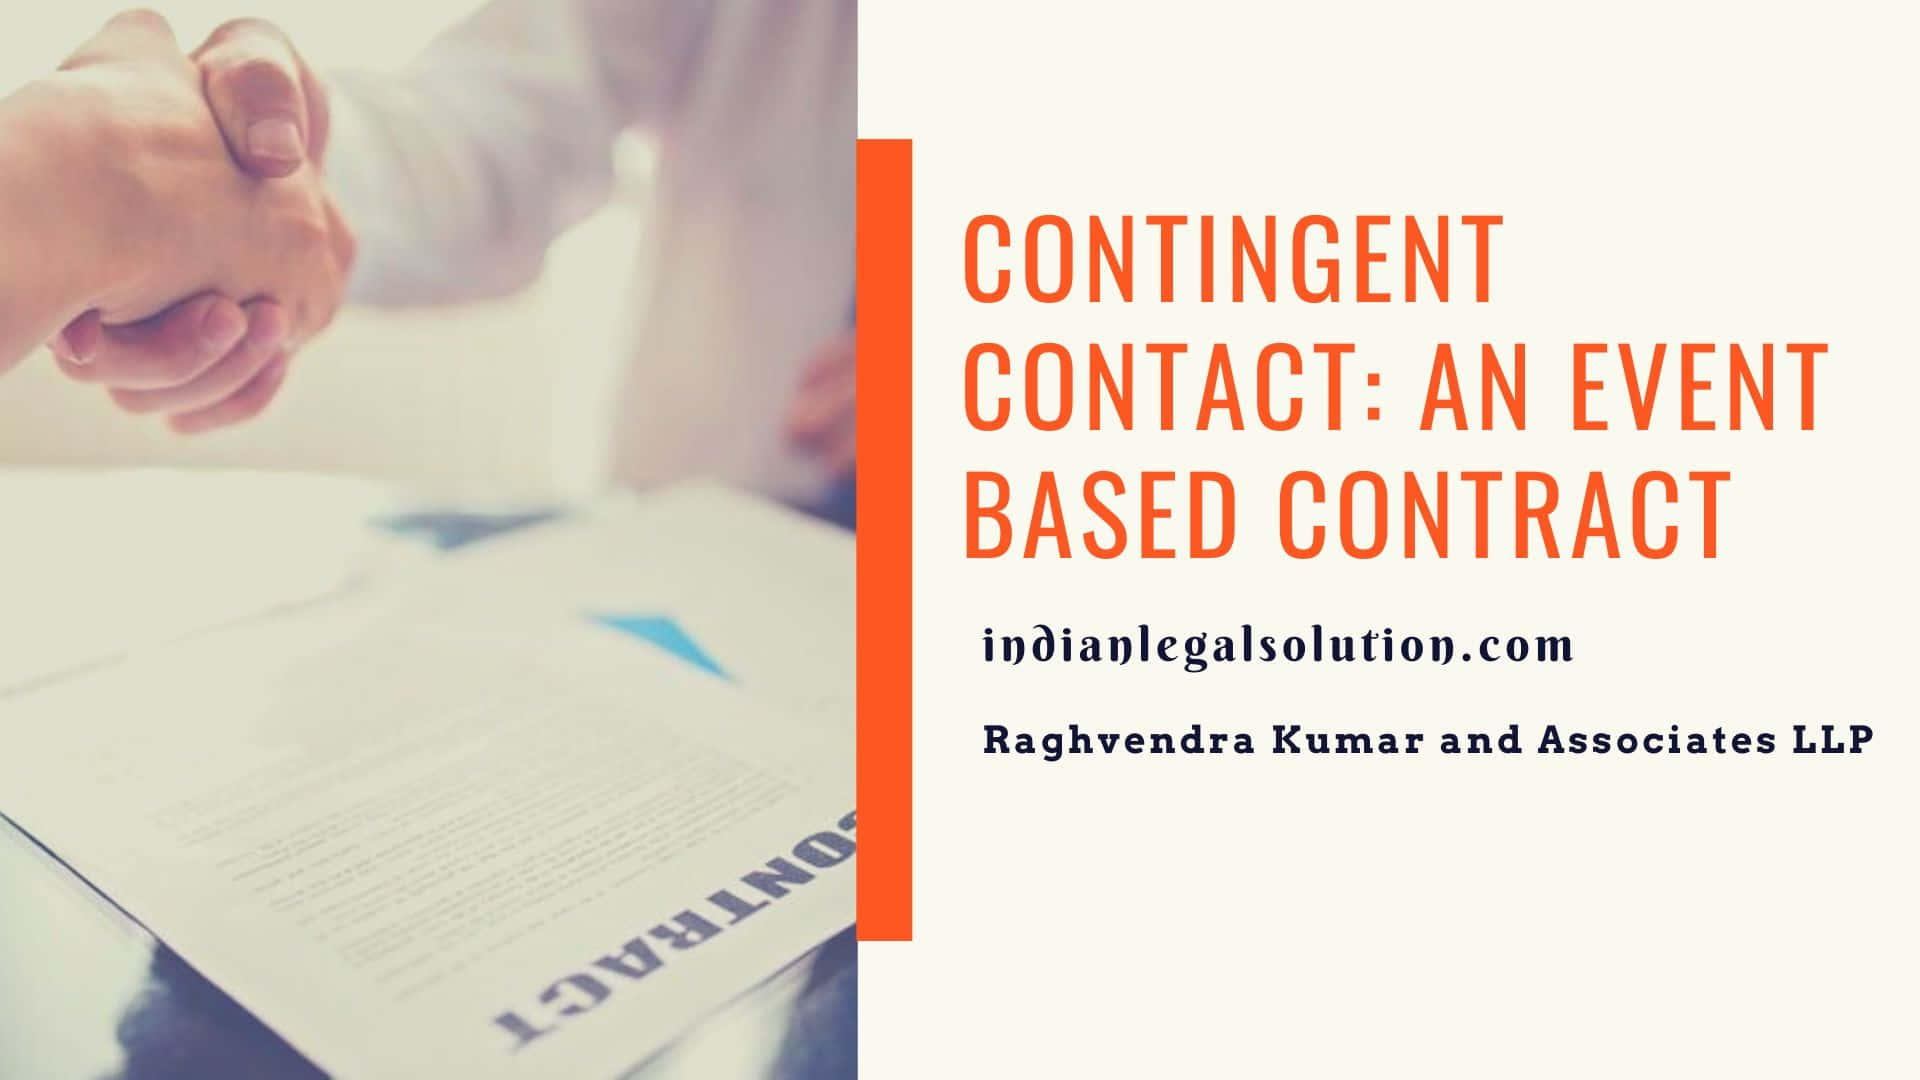 Contingent Contact Poster Background